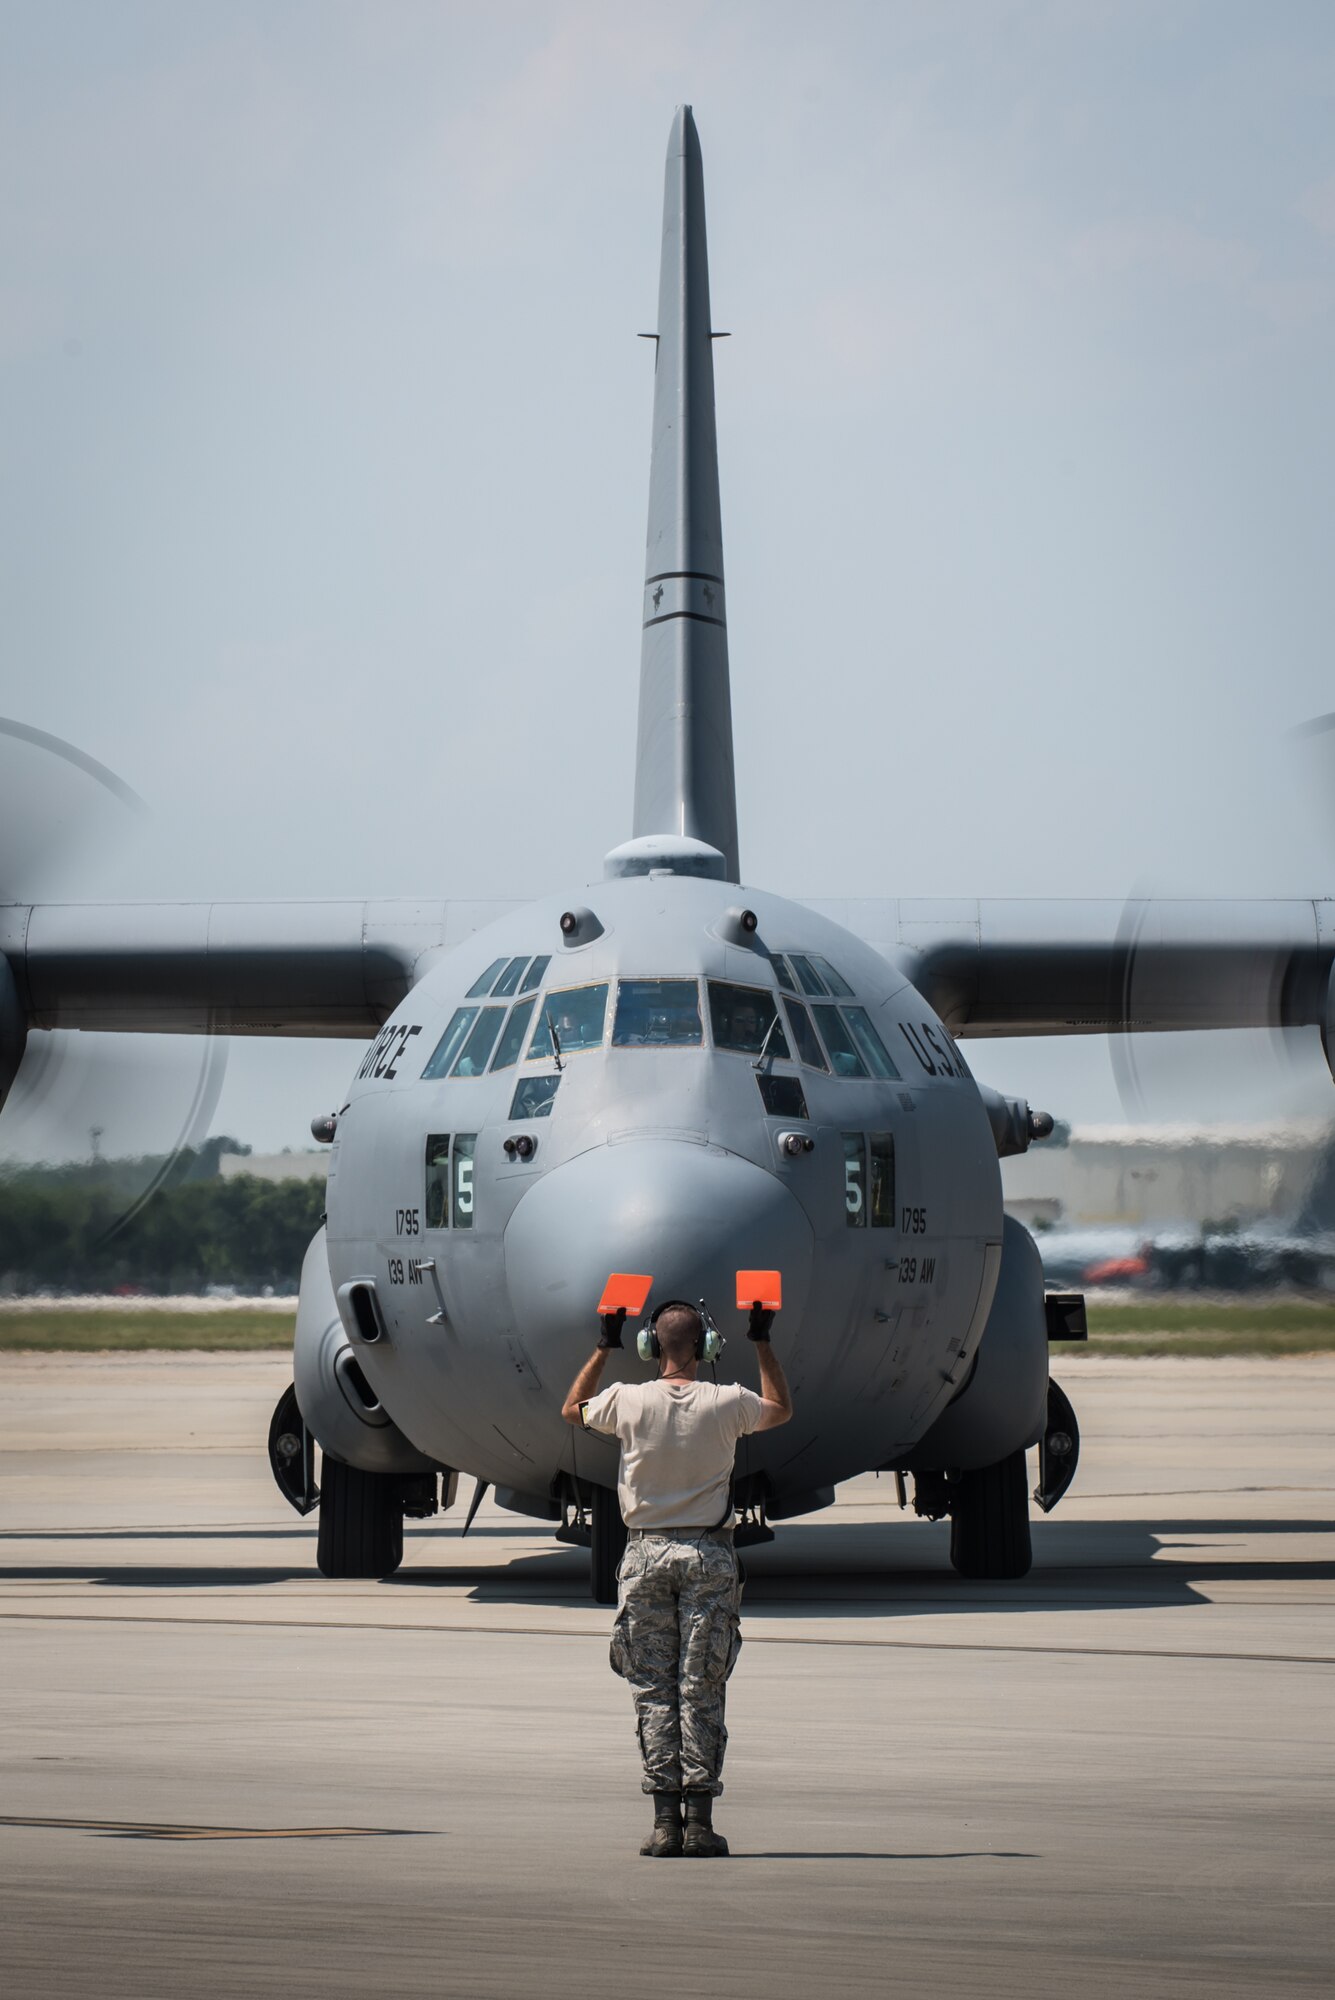 An Airman from the Kentucky Air National Guard’s 123rd Airlift Wing marshals a Connecticut Air National Guard C-130 Hercules aircraft at the Air National Guard’s Air Dominance Center in Savannah, Ga., June 13, 2016. Airmen from the Connecticut unit are participating in Maintenance University here, a weeklong course designed to provide intensive instruction in aircraft maintenance. Now in its eighth year, Maintenance University is sponsored by the 123rd Airlift Wing. (U.S. Air National Guard photo by Lt. Col. Dale Greer)